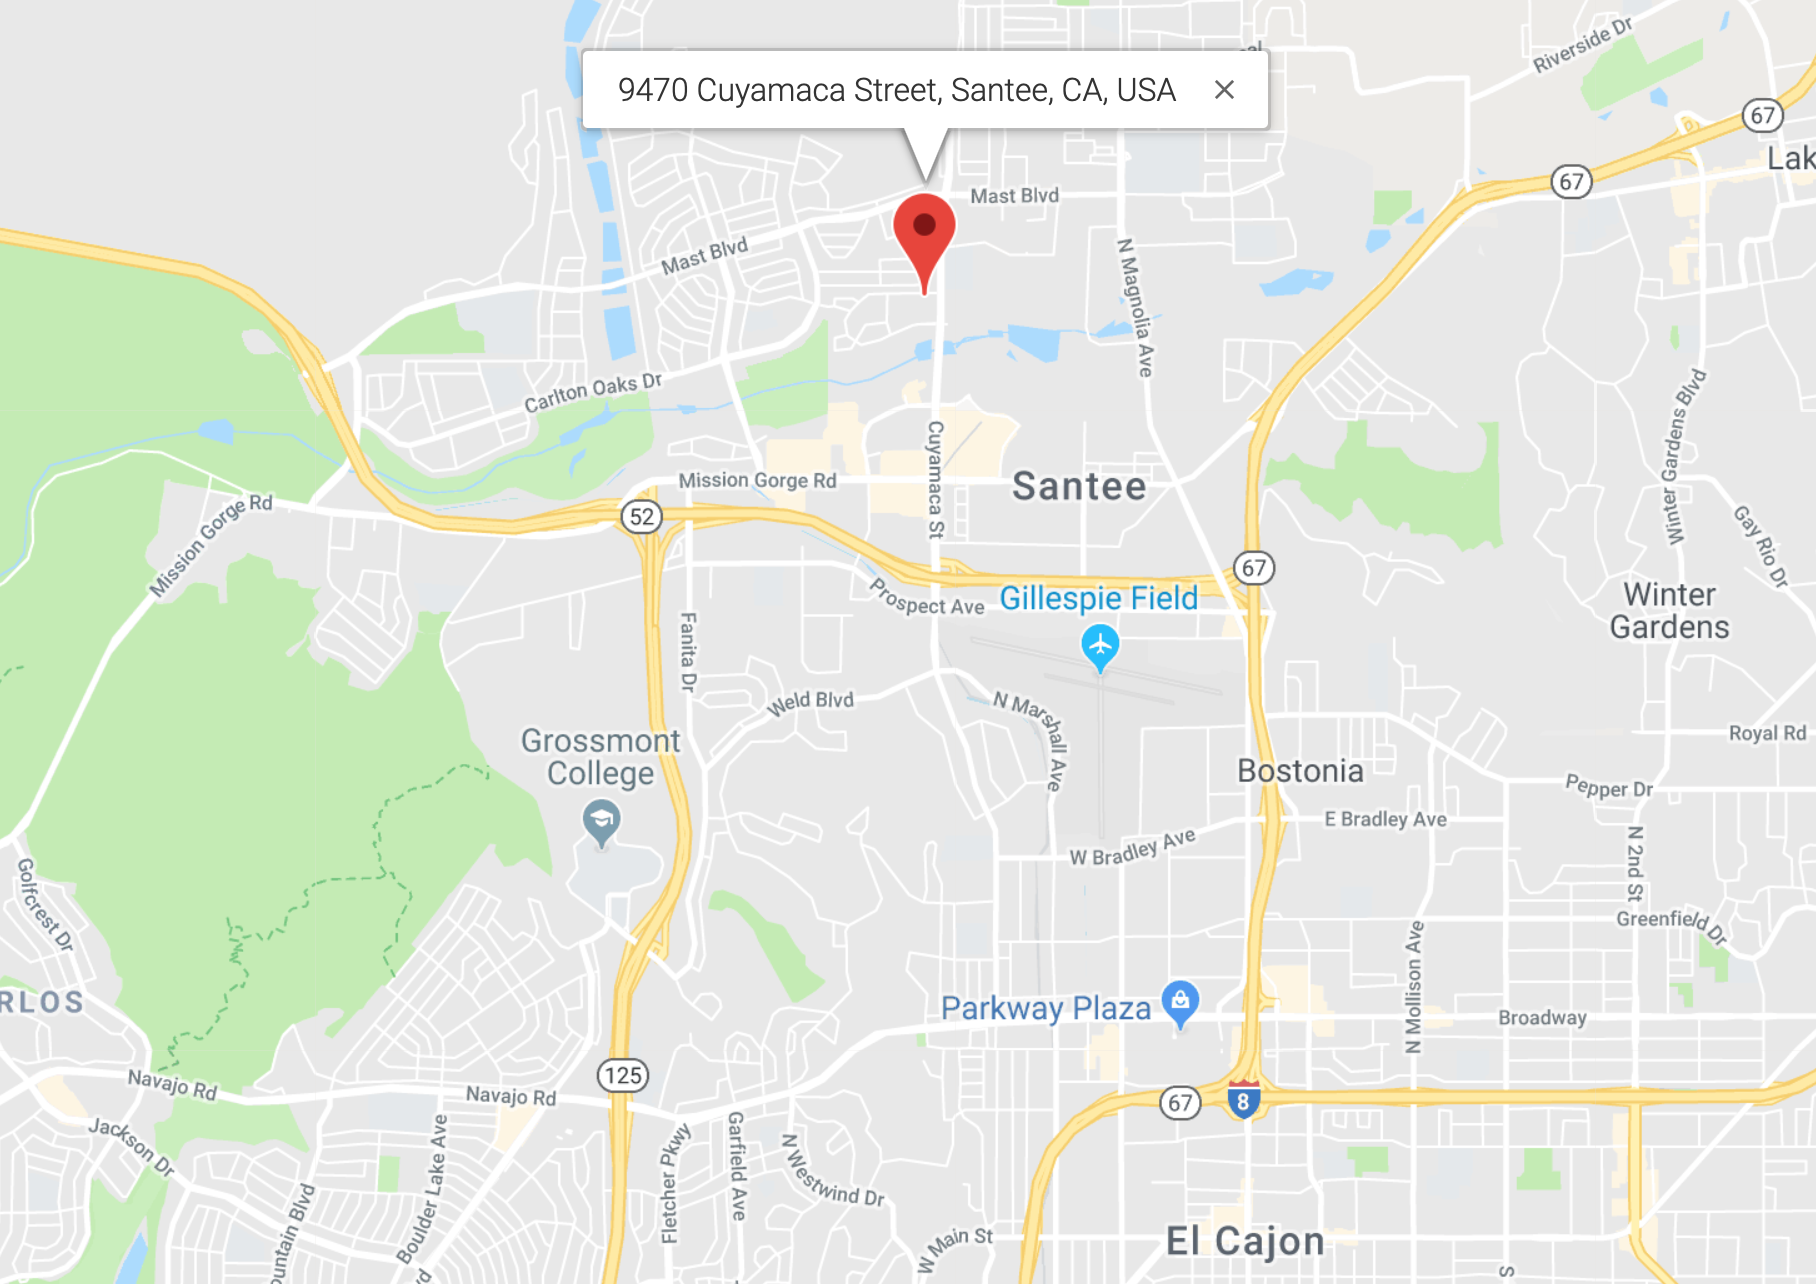 Map showing the location of Centre Laundry in Santee, CA - Santee's nicest place to do your laundry!